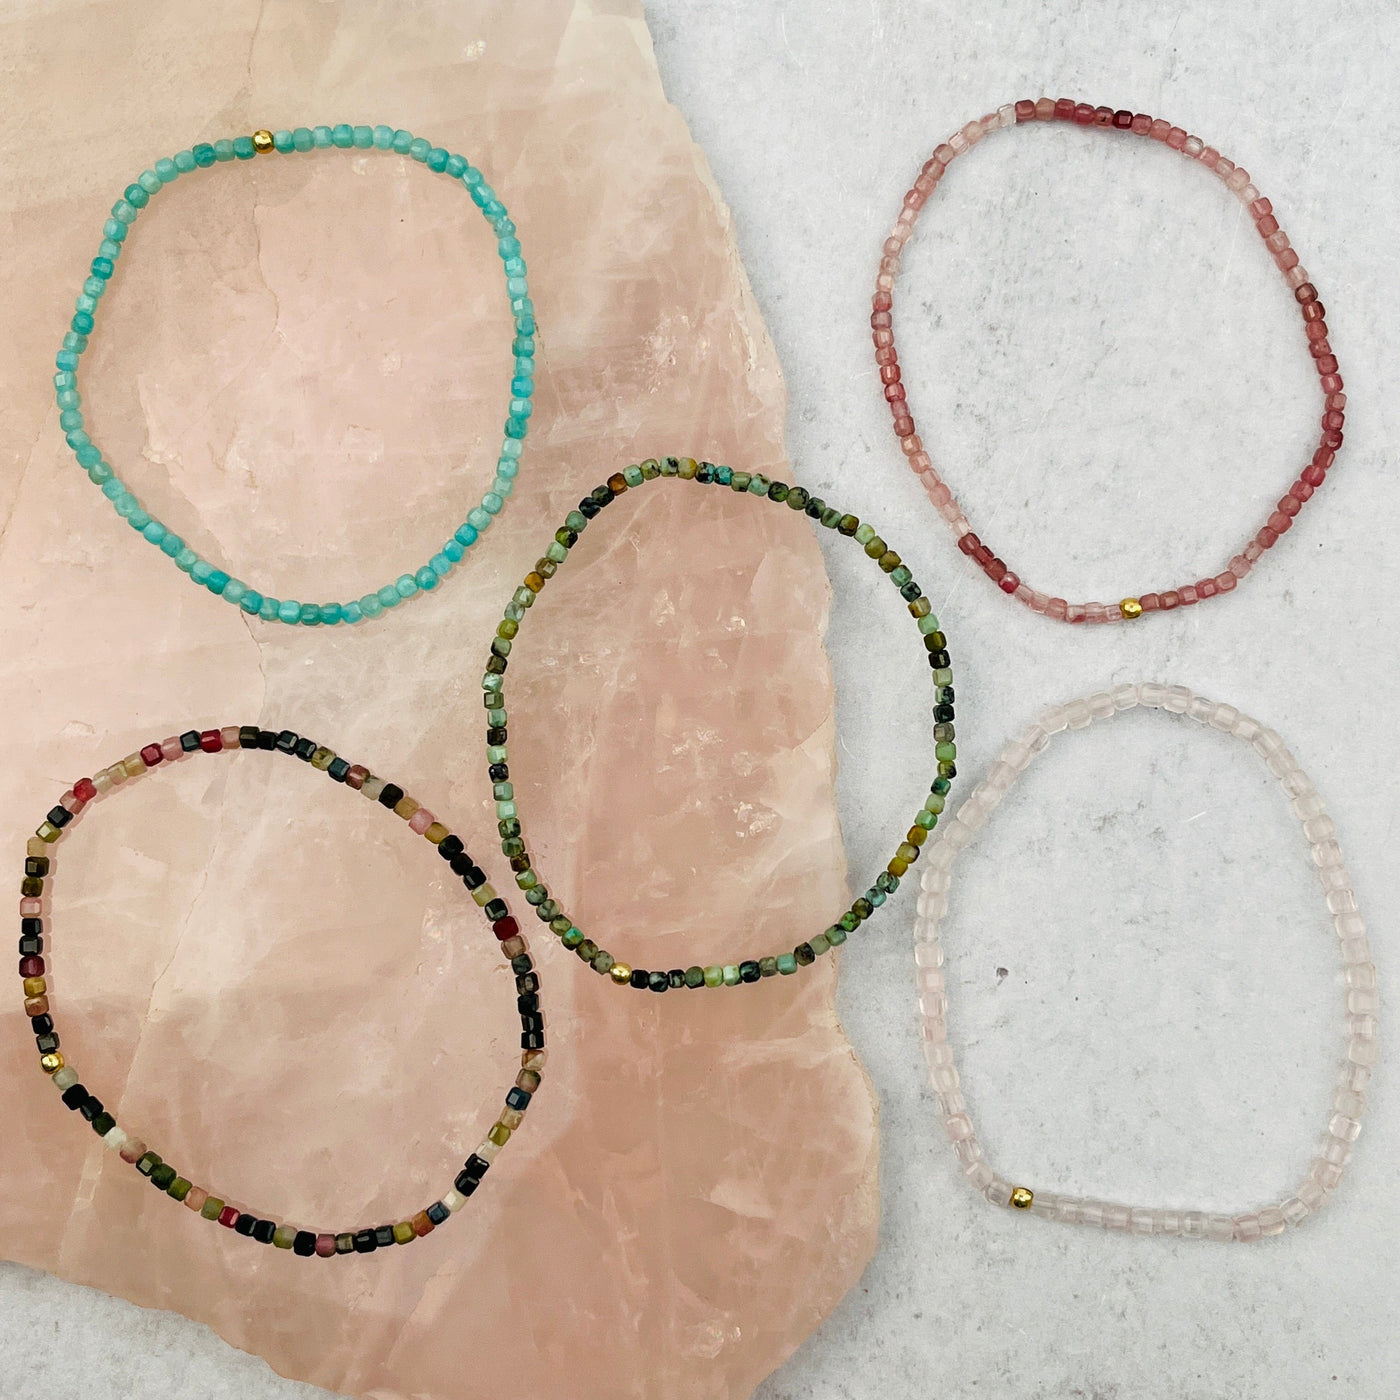 bracelets displayed to show the differences in the gemstone types 